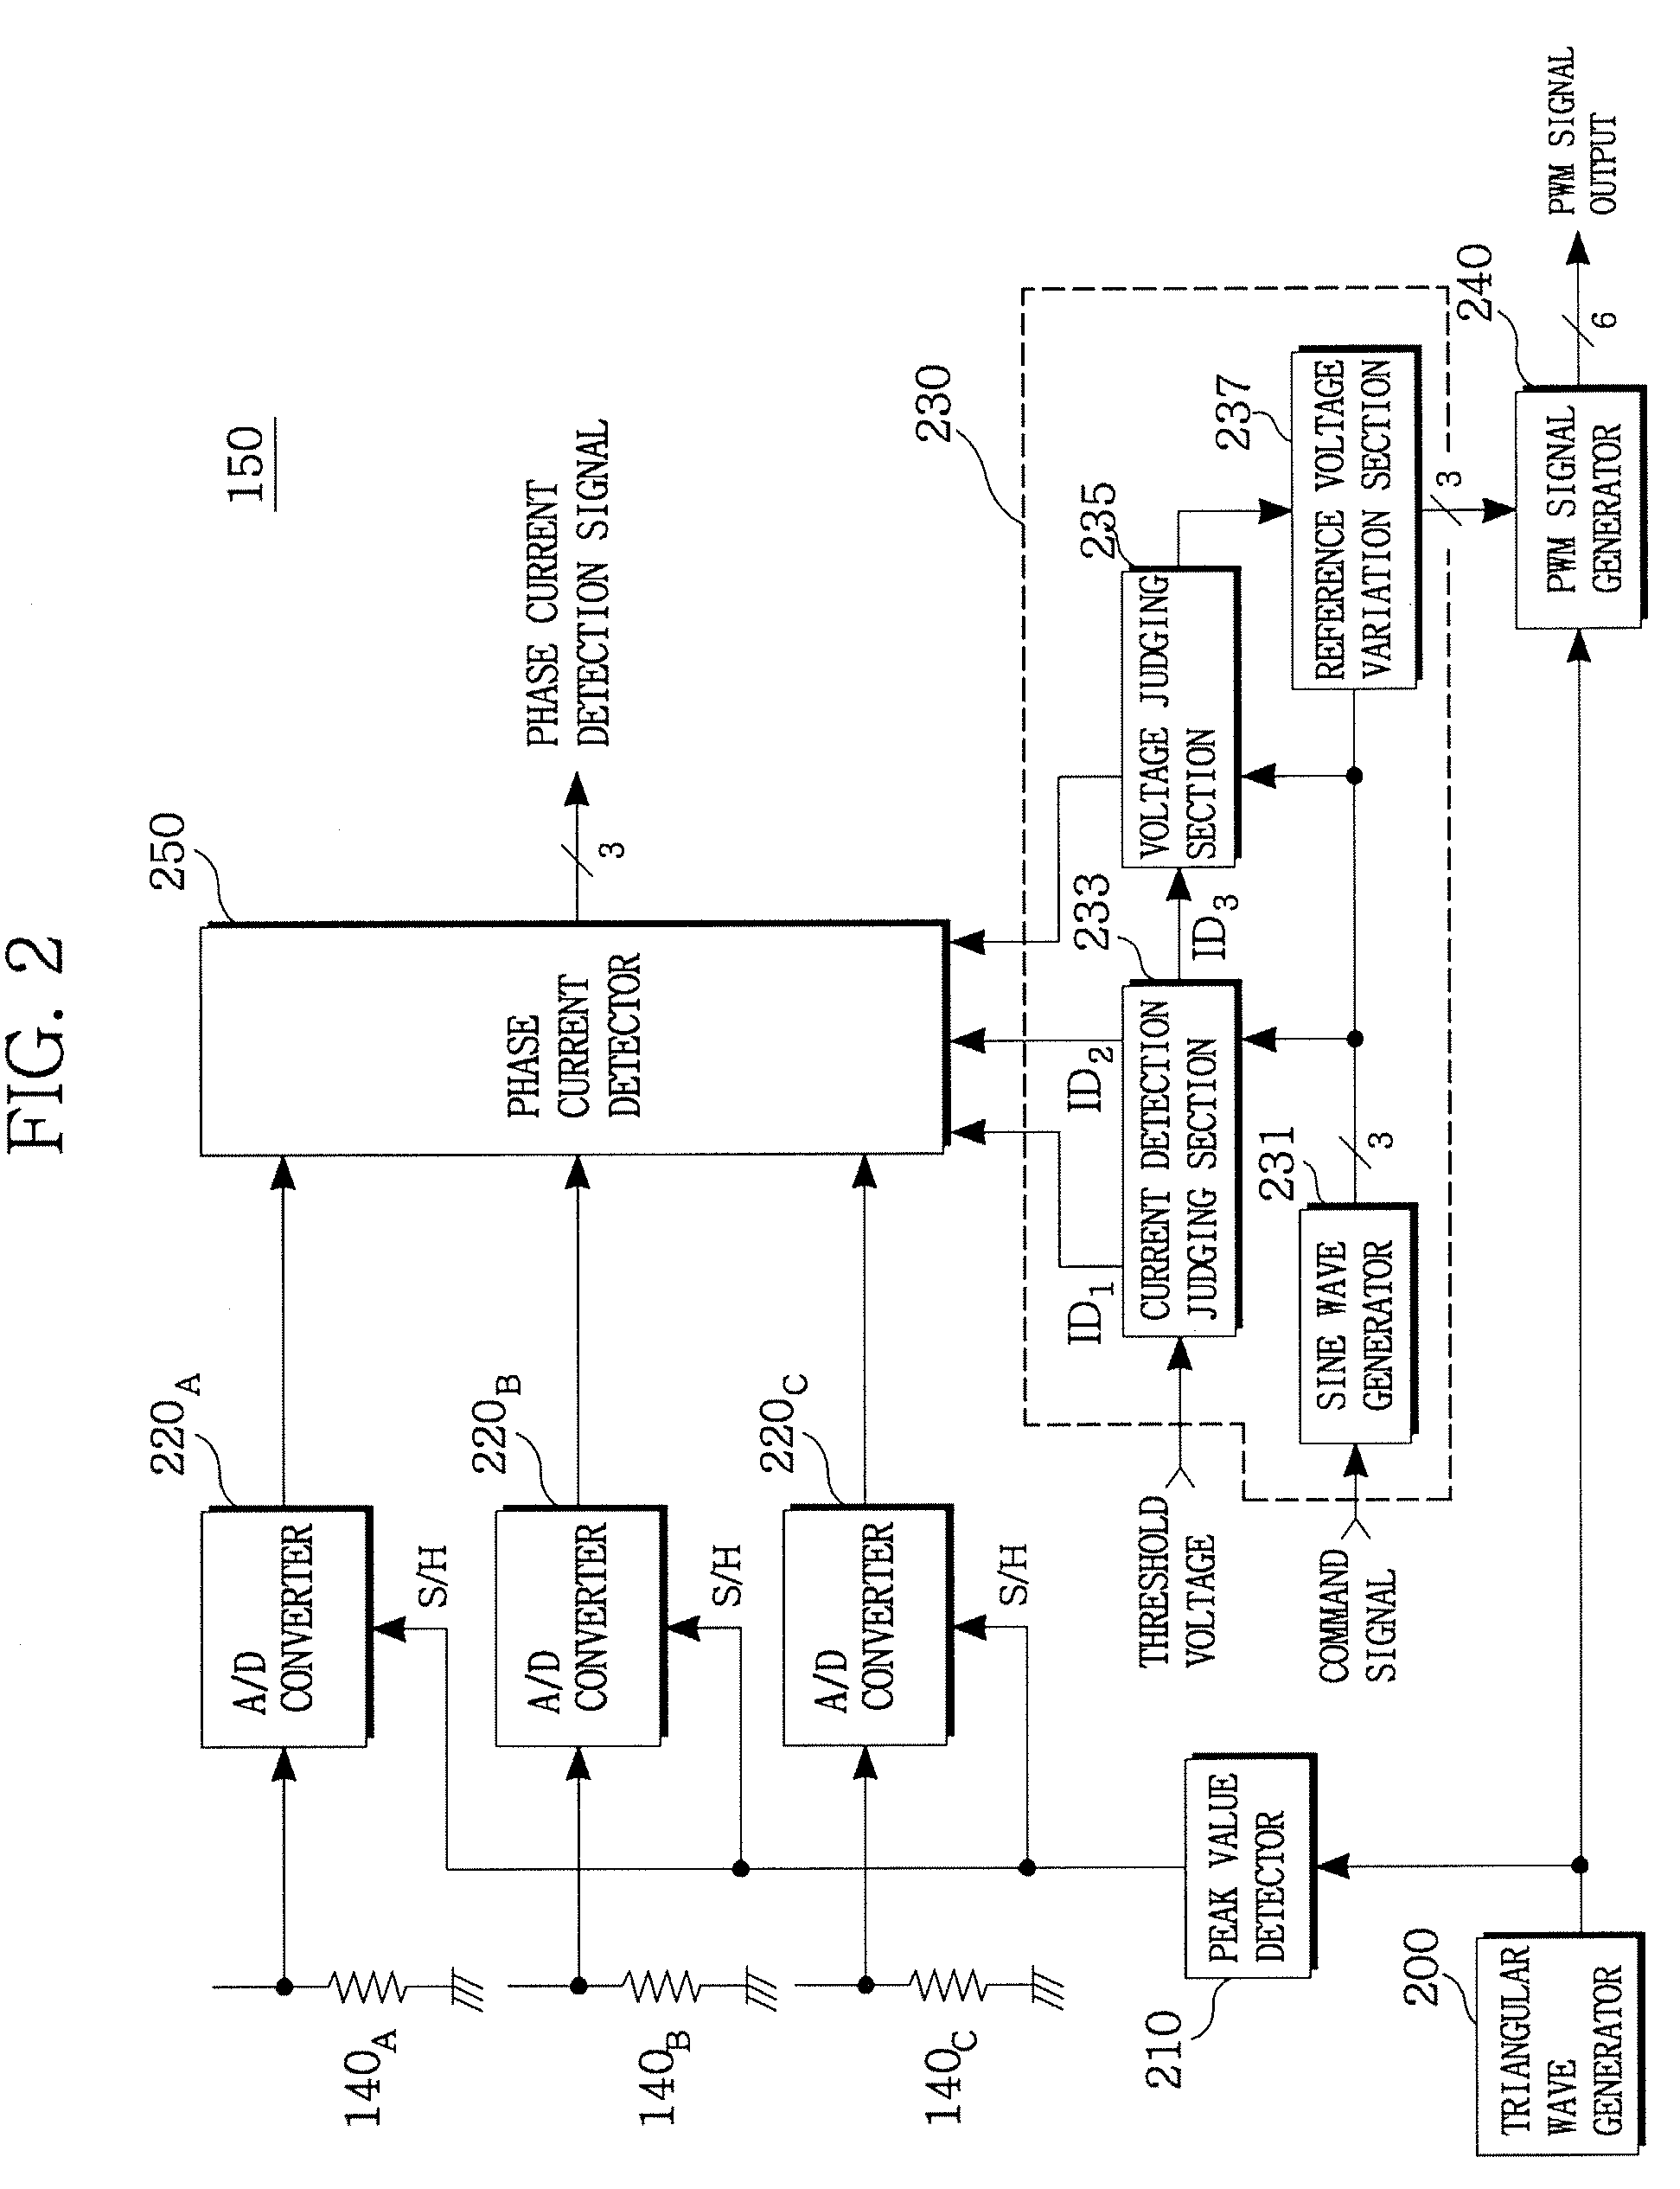 Apparatus and method for detecting phase currents of inverter